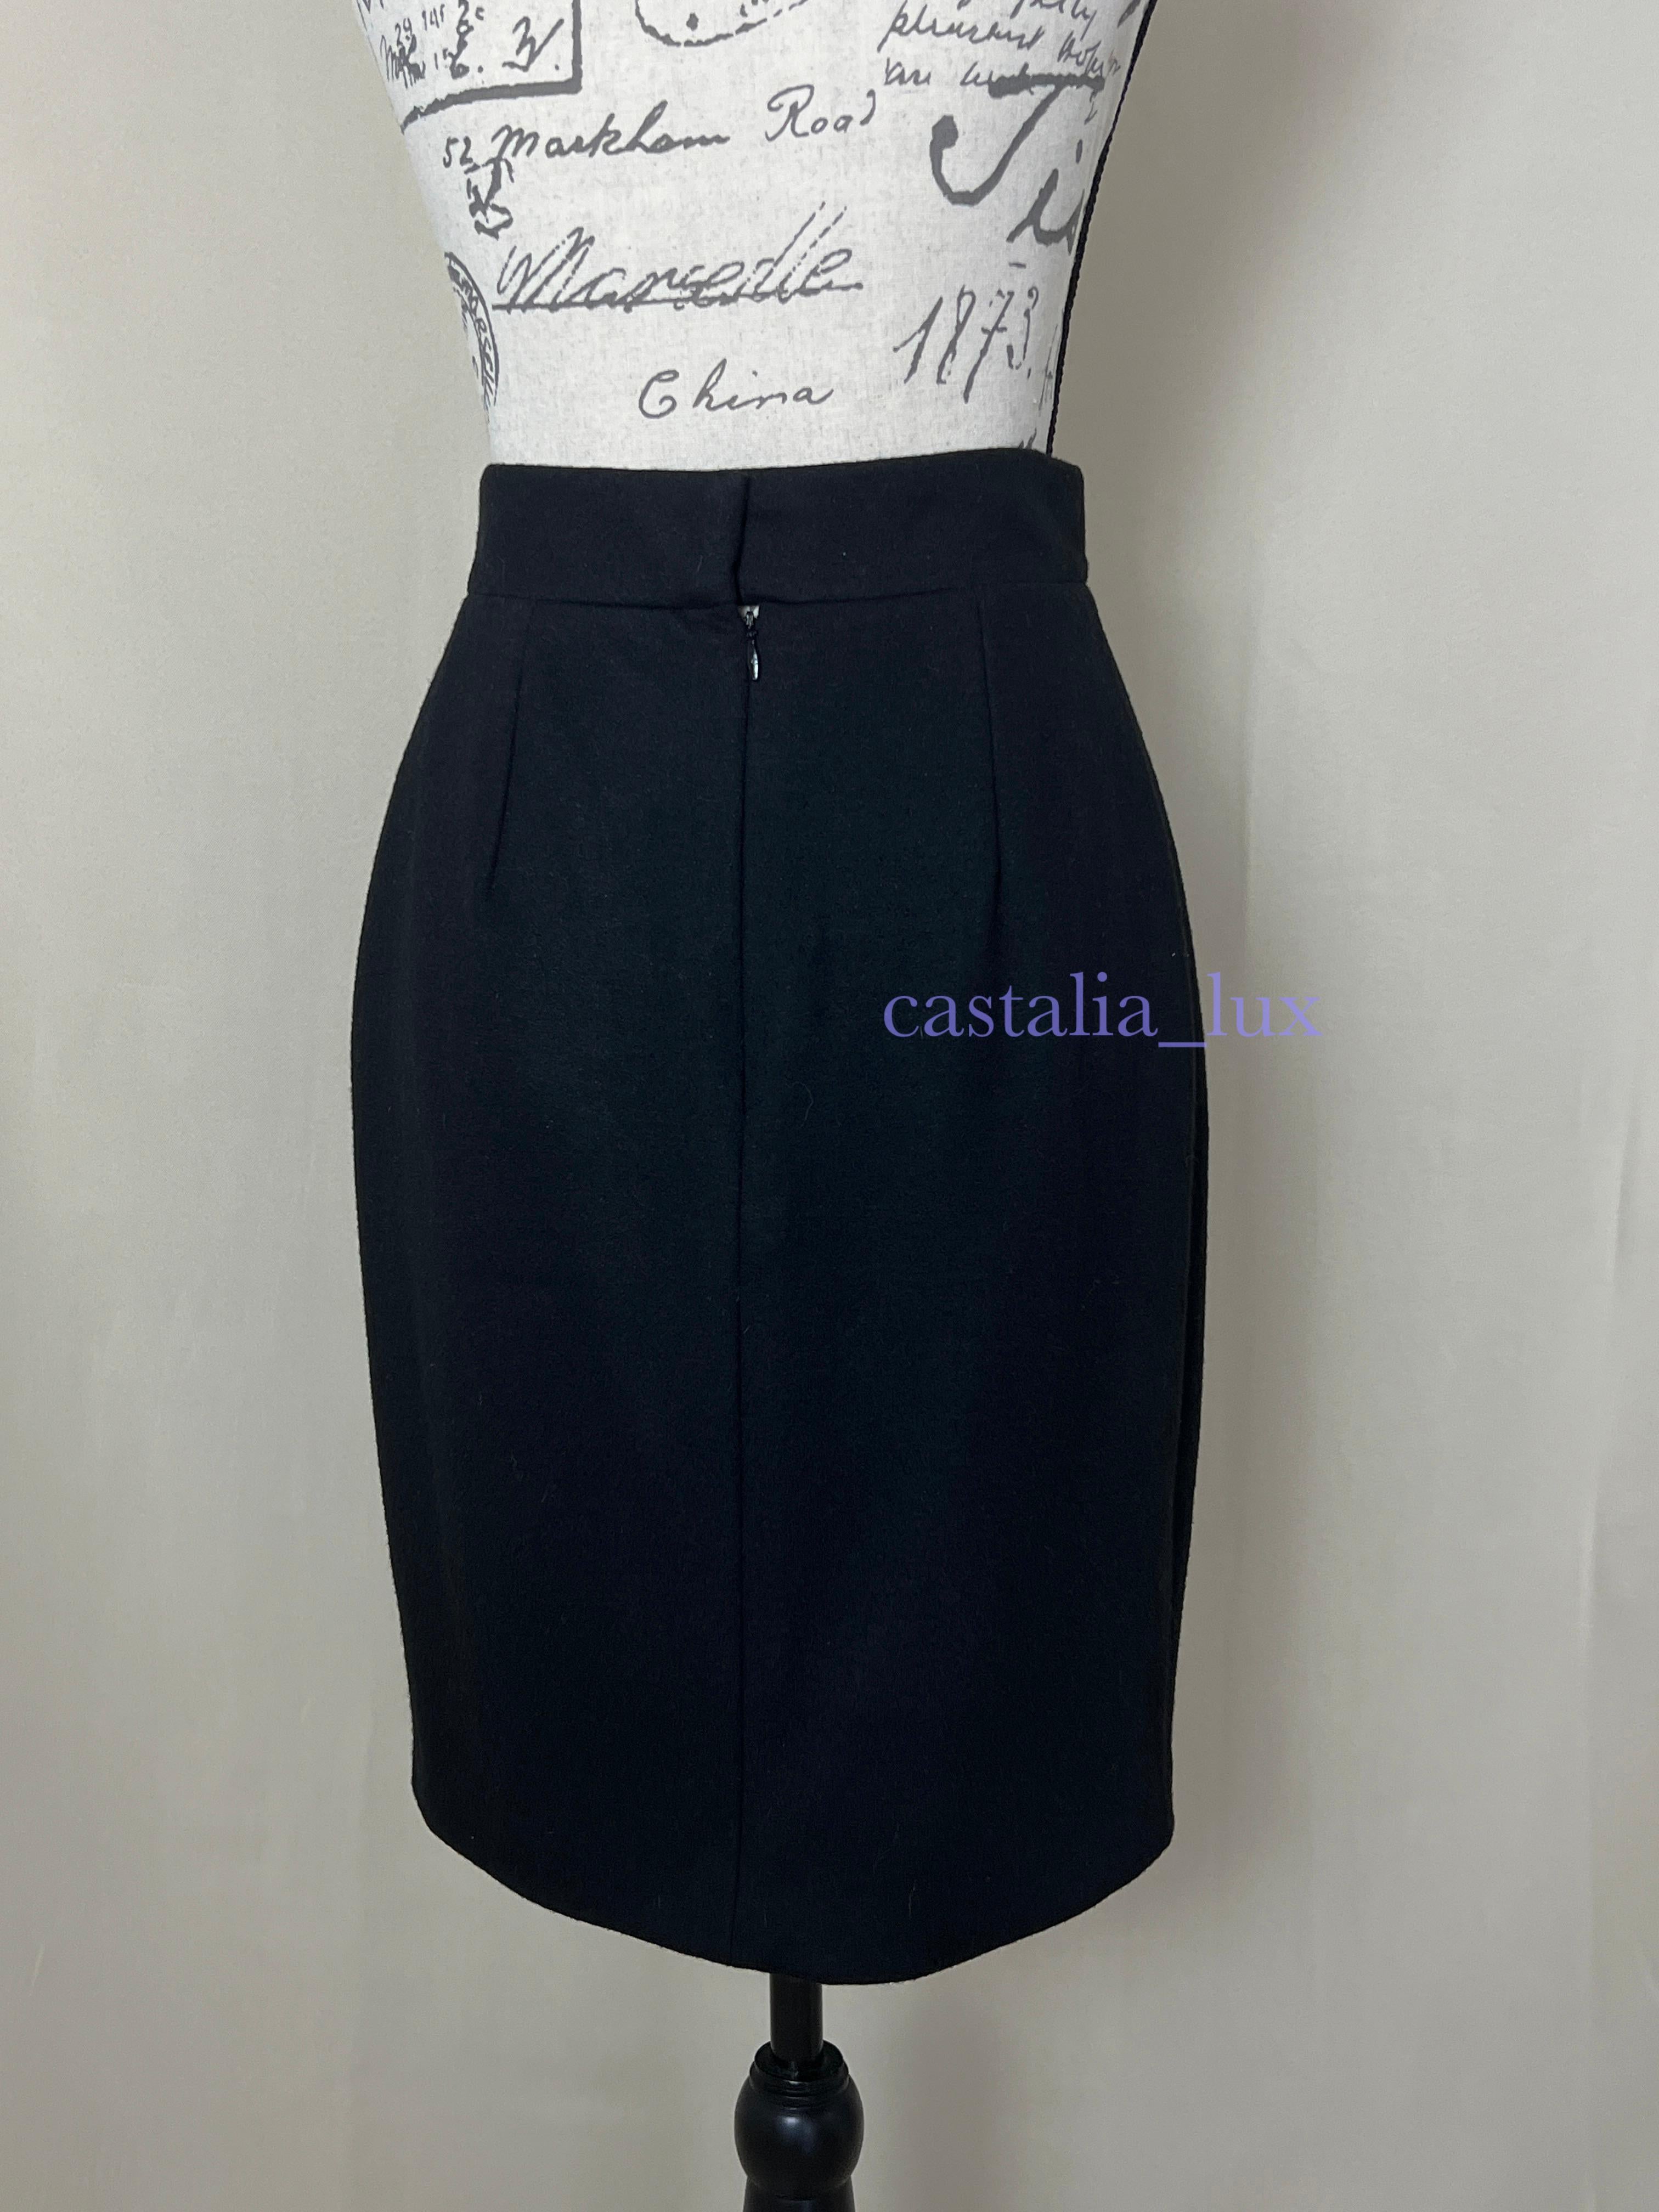 Chanel New Eagle Charm Black Pencil Skirt For Sale 5